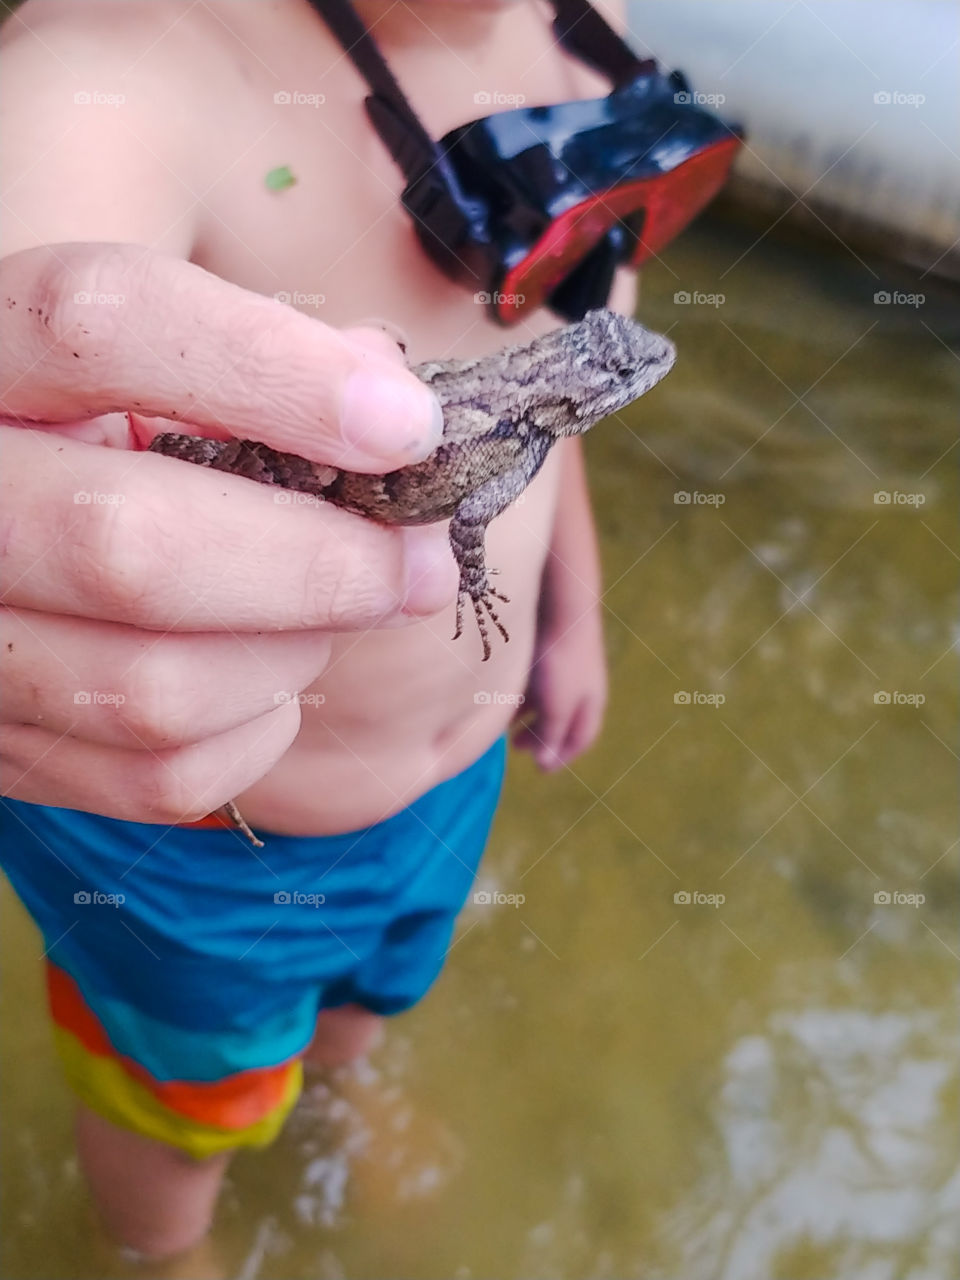 Little boy wearing swim trunks holds lizard he found while playing in woods at lake.